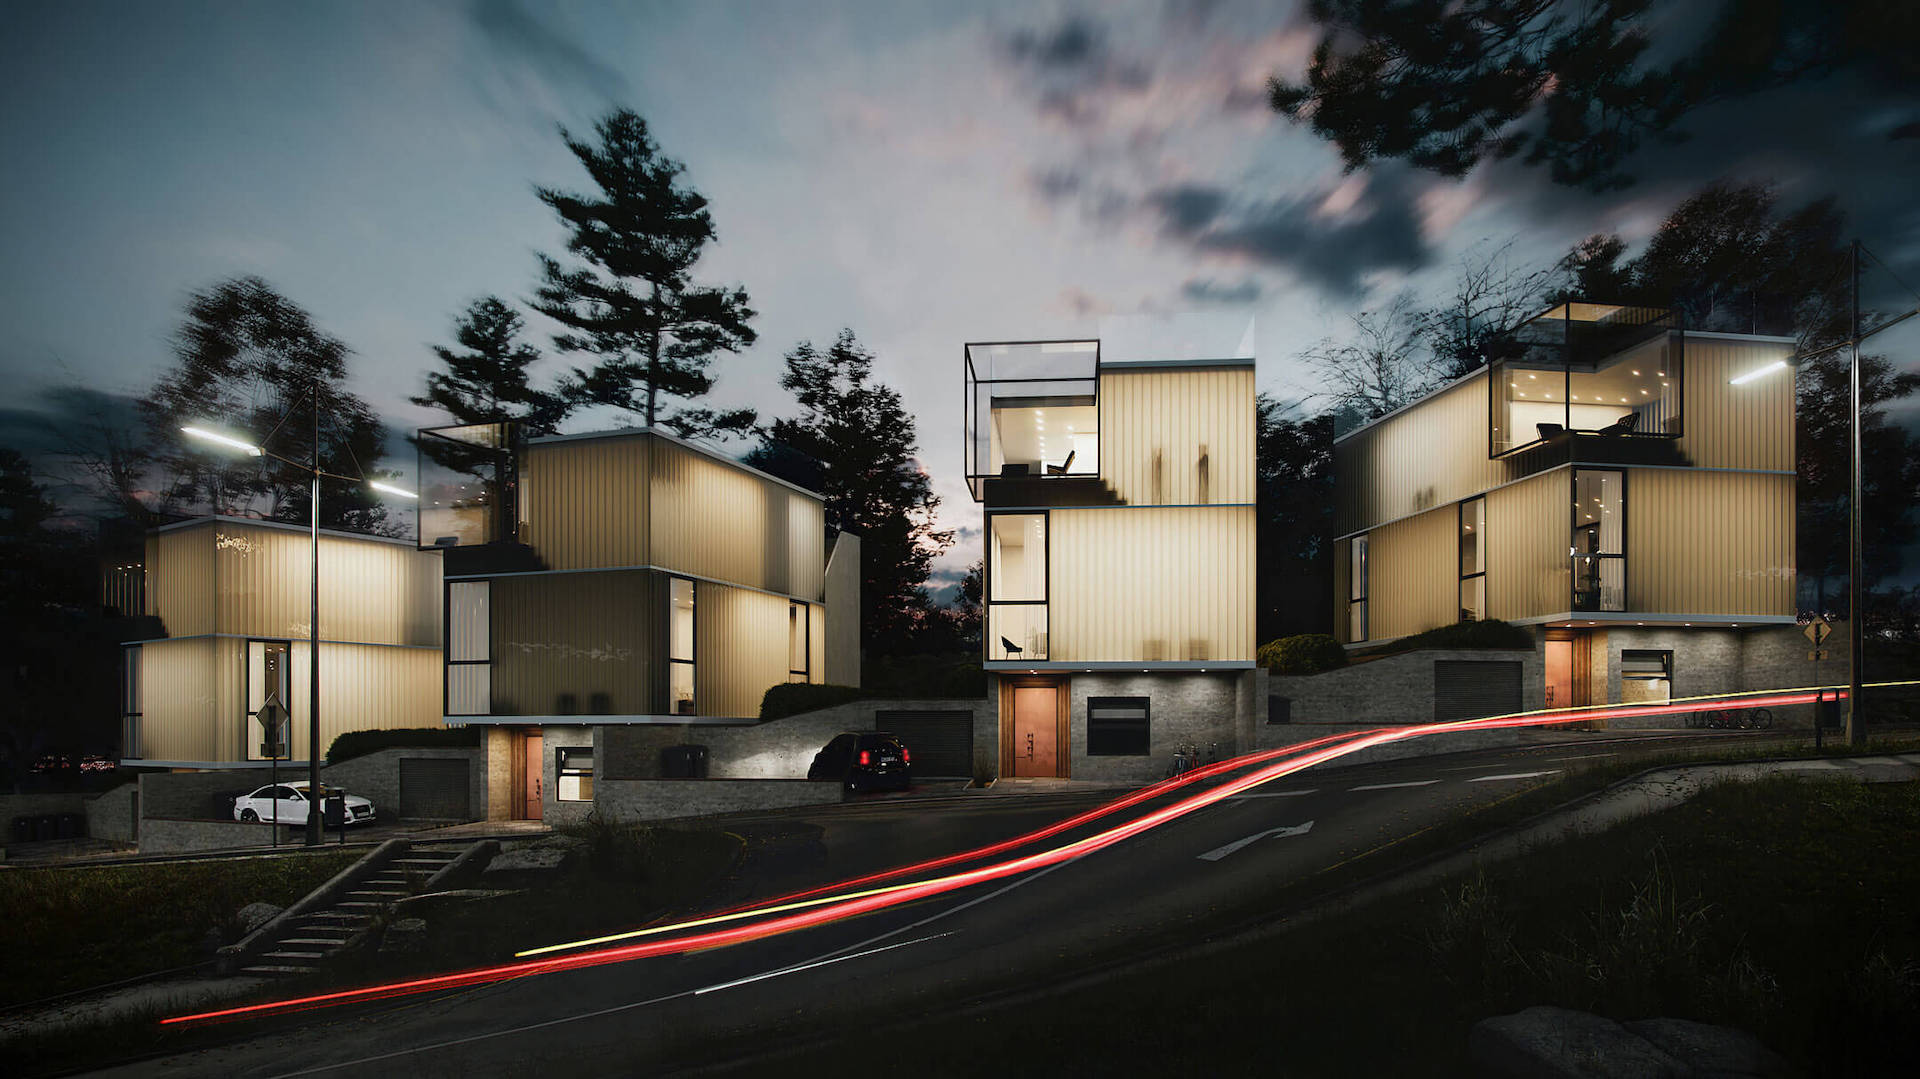 Atmospheric Nighttime 3D Rendering of a Small Stylish Housing Complex